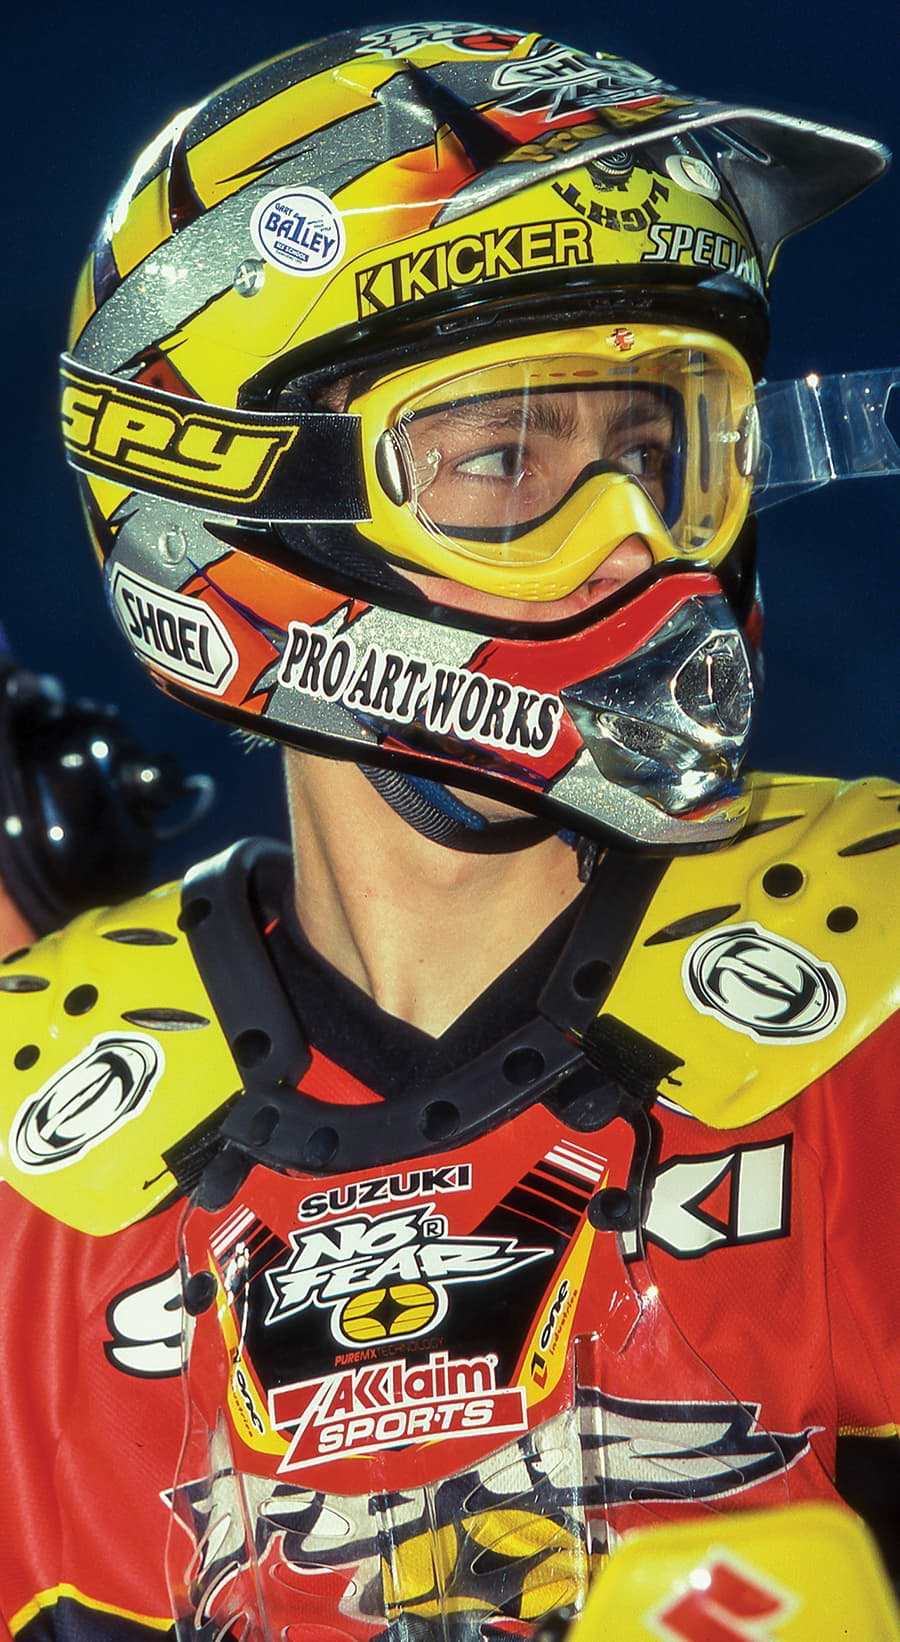 No Fear MX’s high-water mark came in 2000-’01 when McGrath’s reign as the King of Supercross was in full swing and Pastrana’s popularity was exploding. 